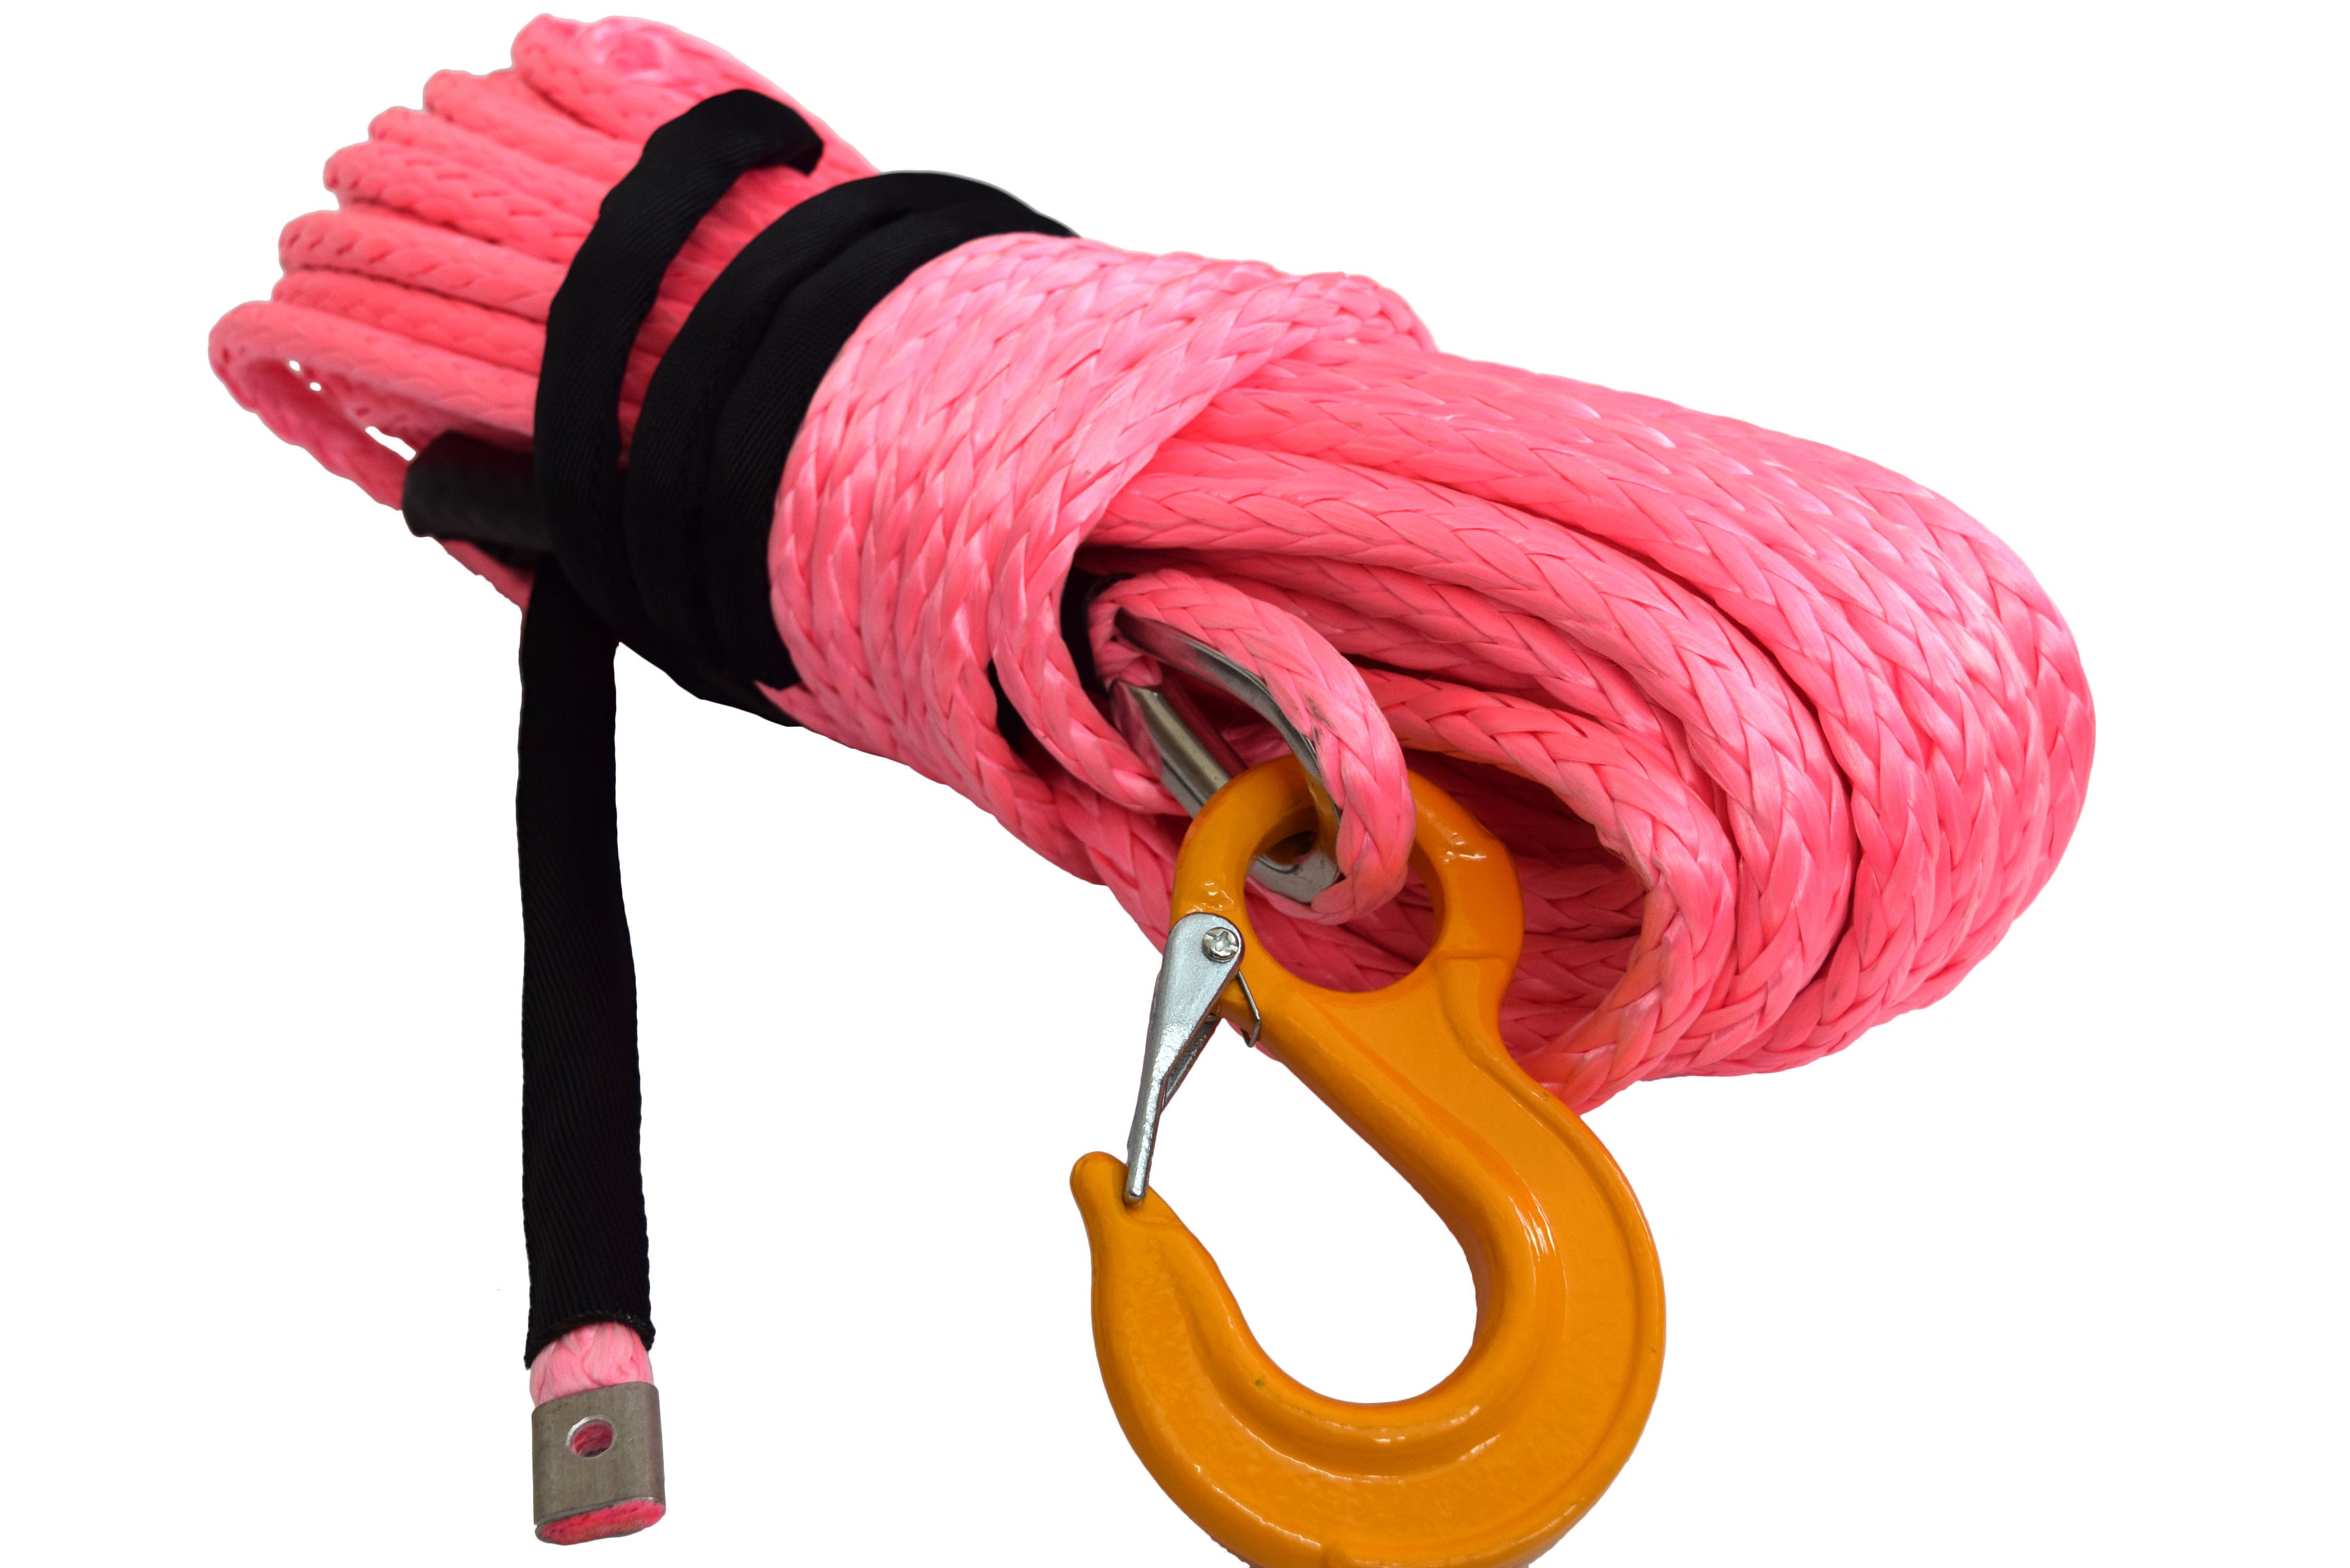 QIQU pink 100 ft 1/2 inch SUV Off-road car synthetic winch cable rope line with hook and lug